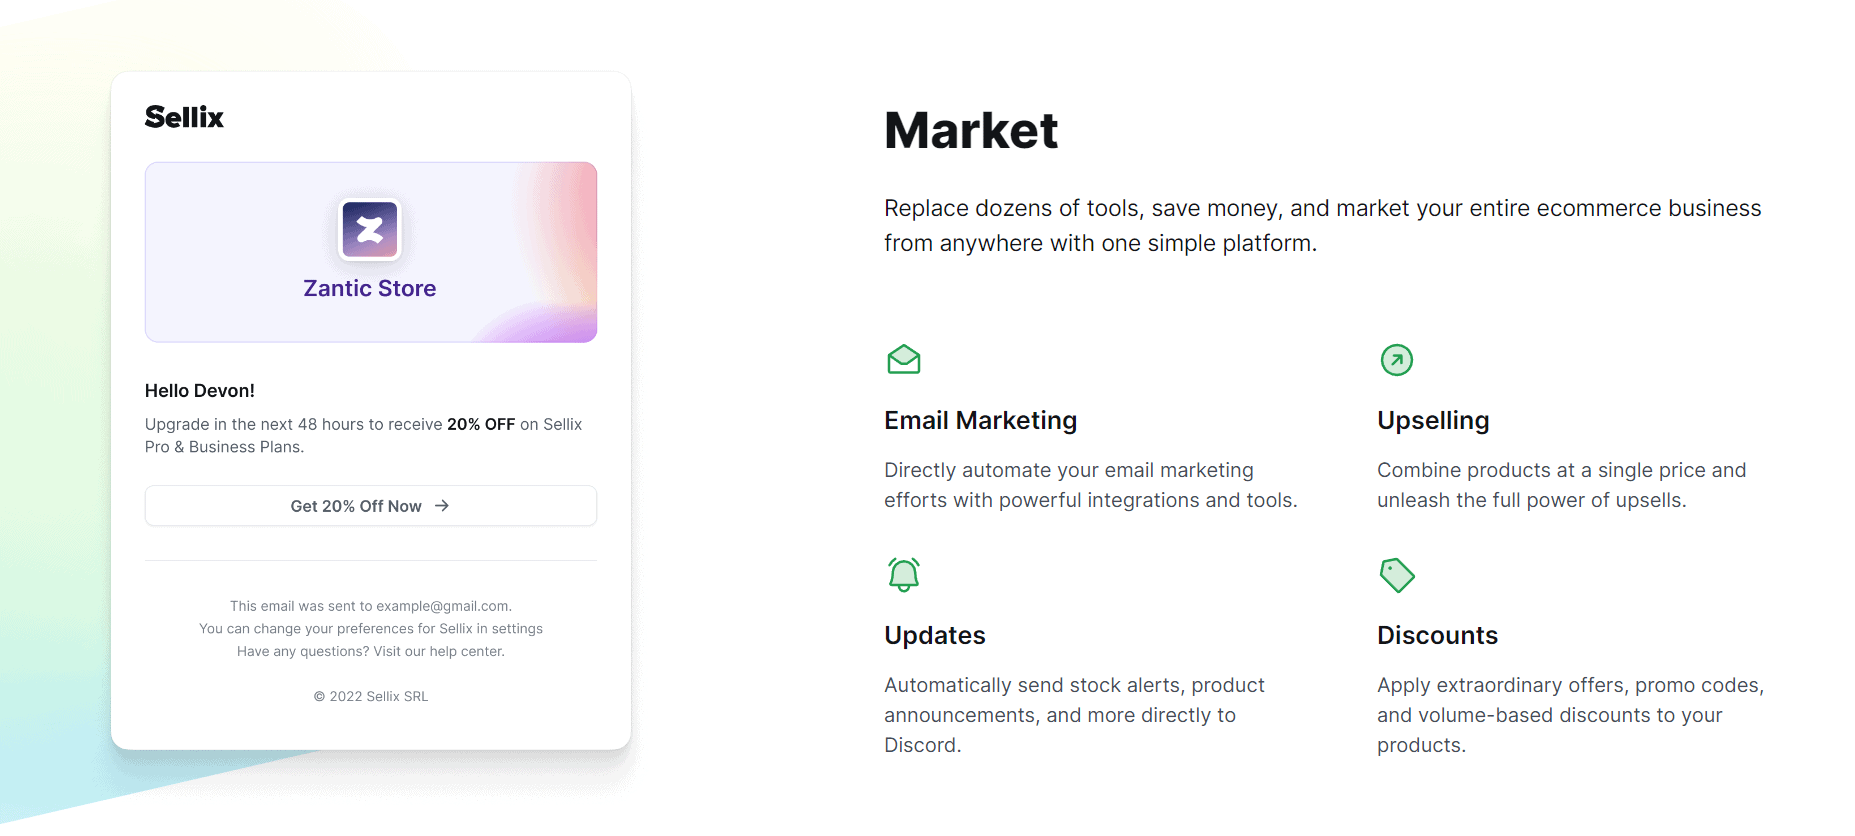 Sellix Market Features